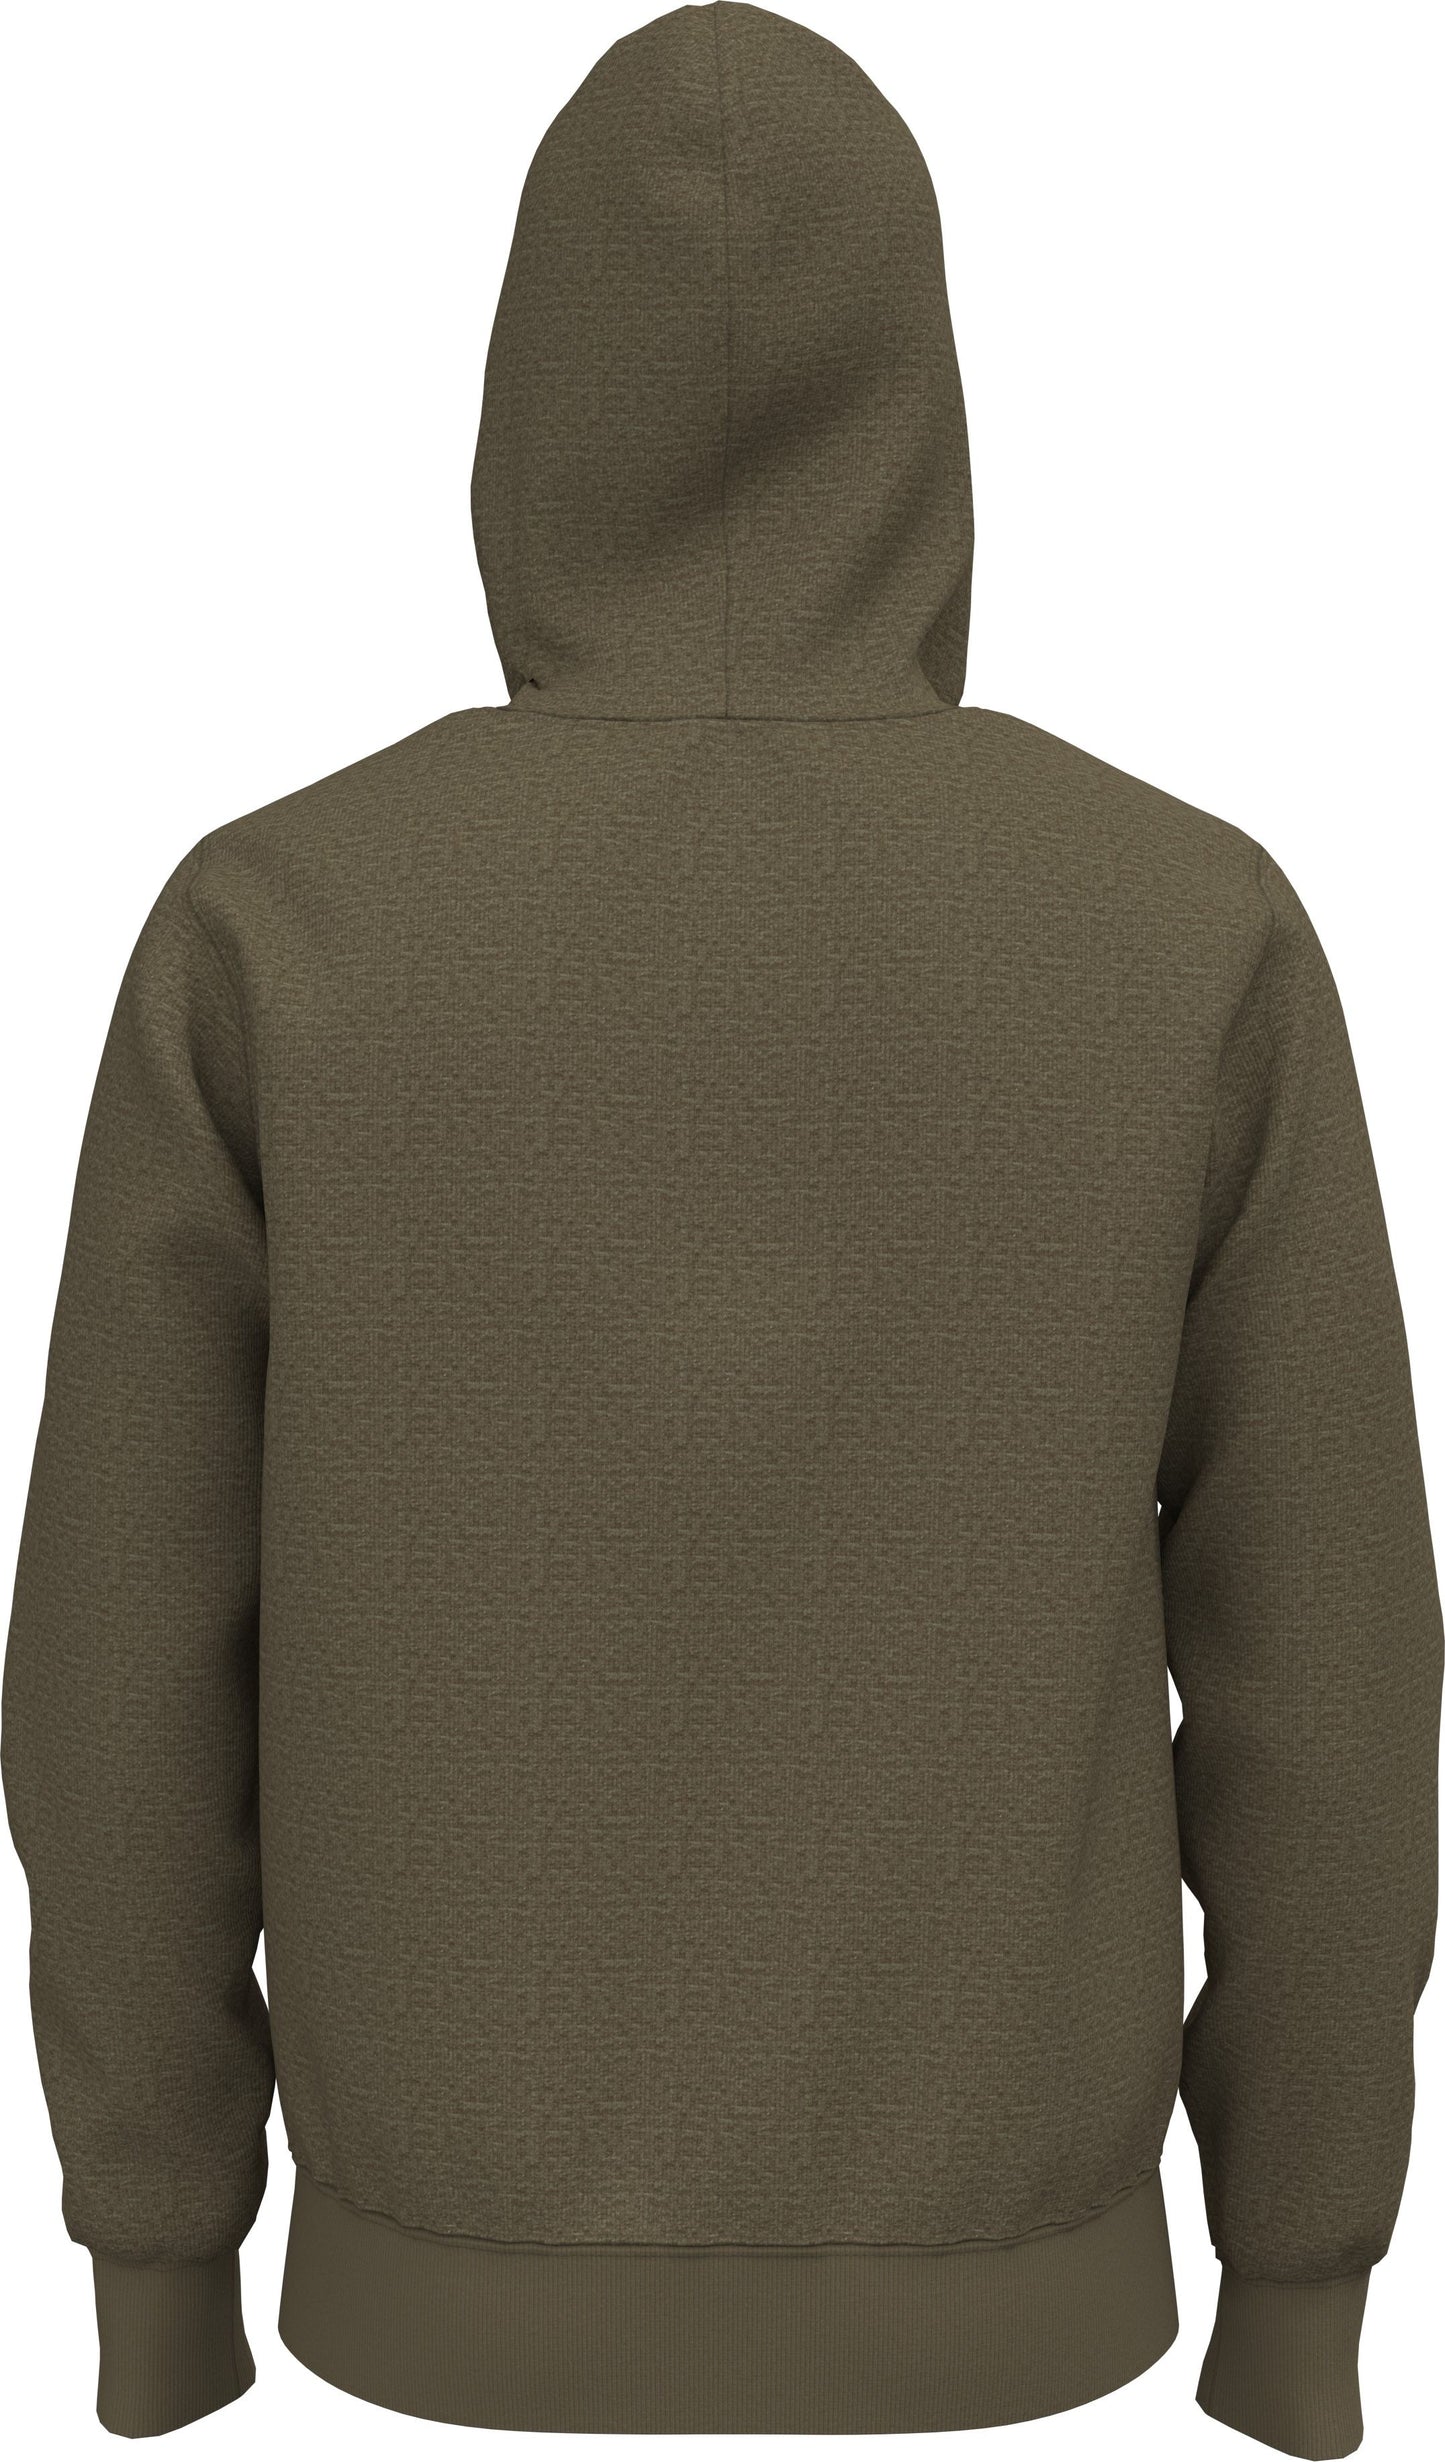 The North Face Apparel Men's Half Dome Pullover Hoodie Military Olive/multi Color Print